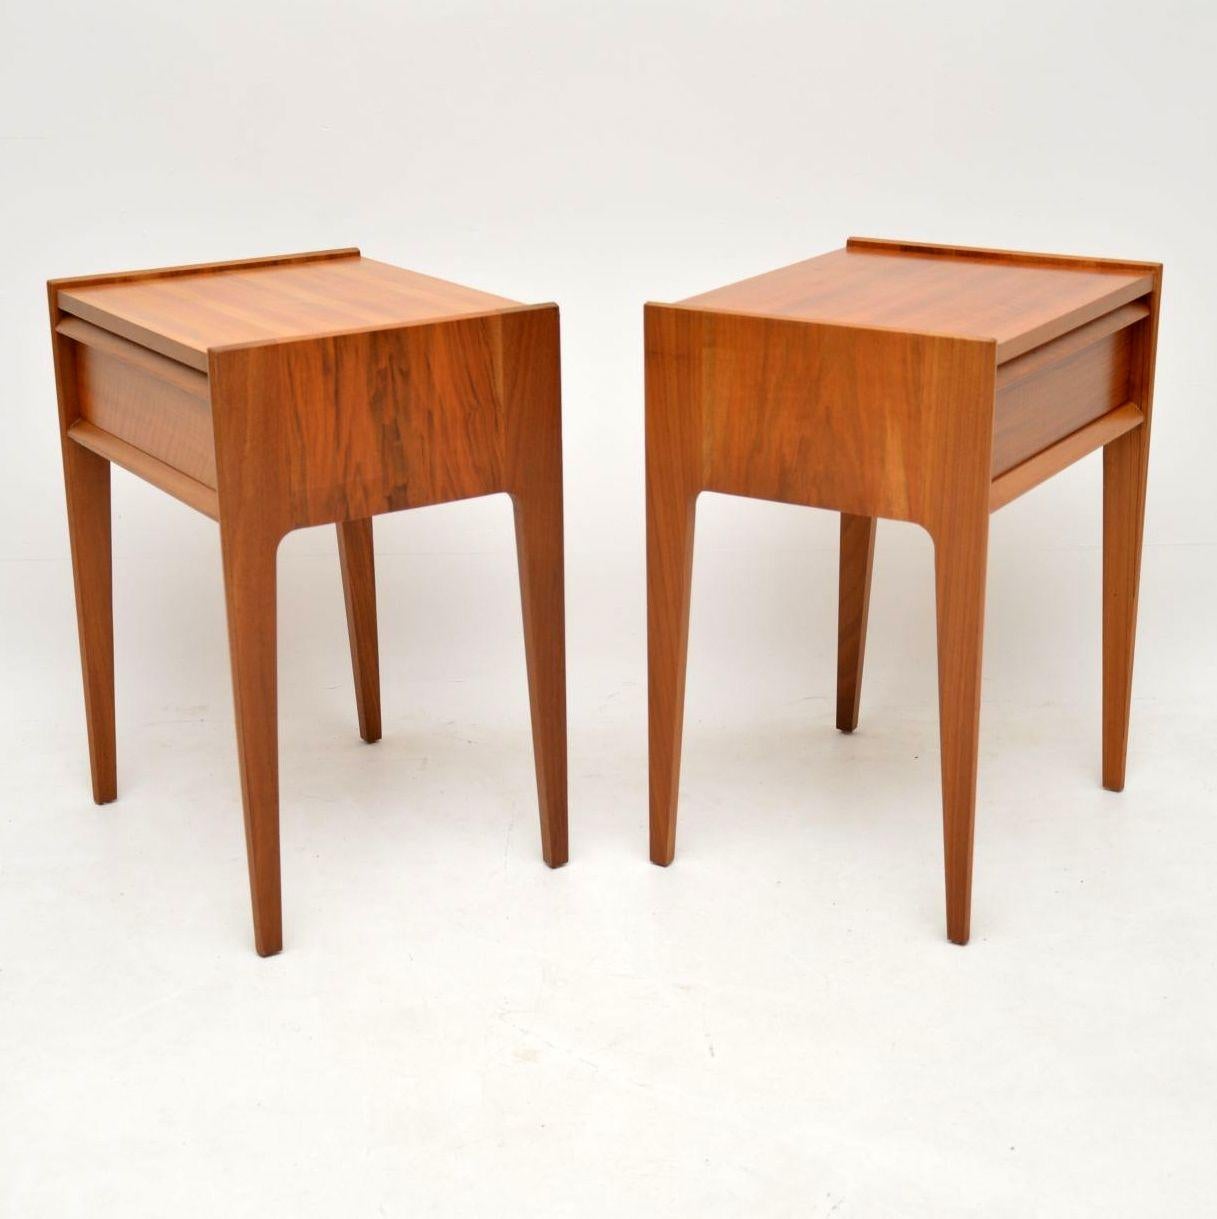 British Pair of 1960s Vintage Walnut Bedside Tables by Younger